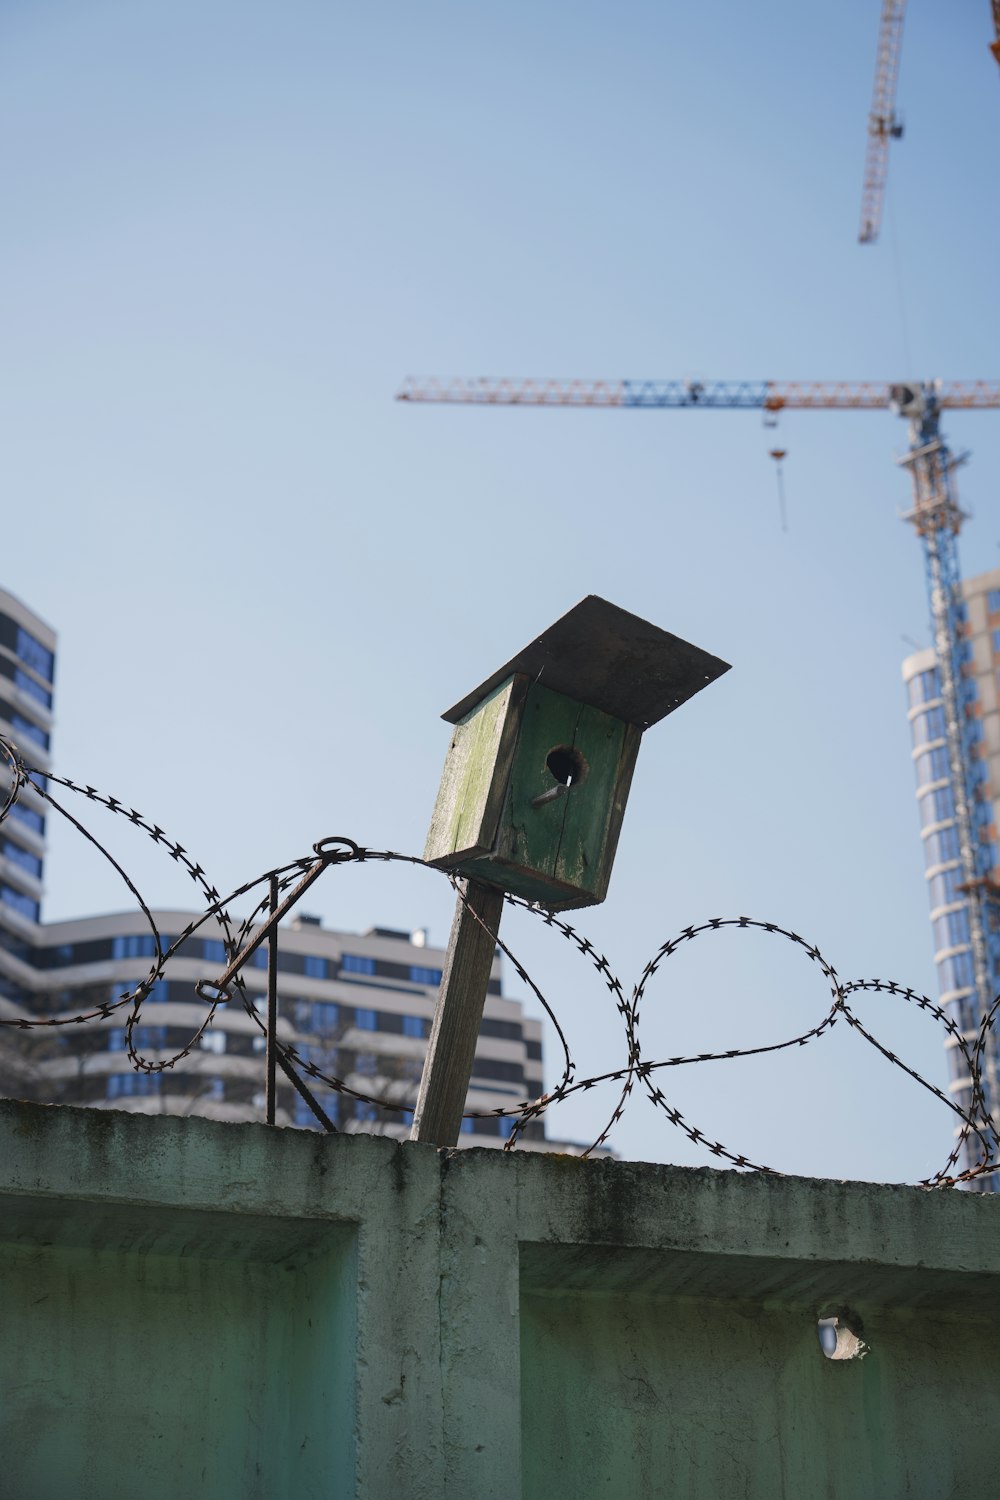 a birdhouse on top of a fence with a building in the background